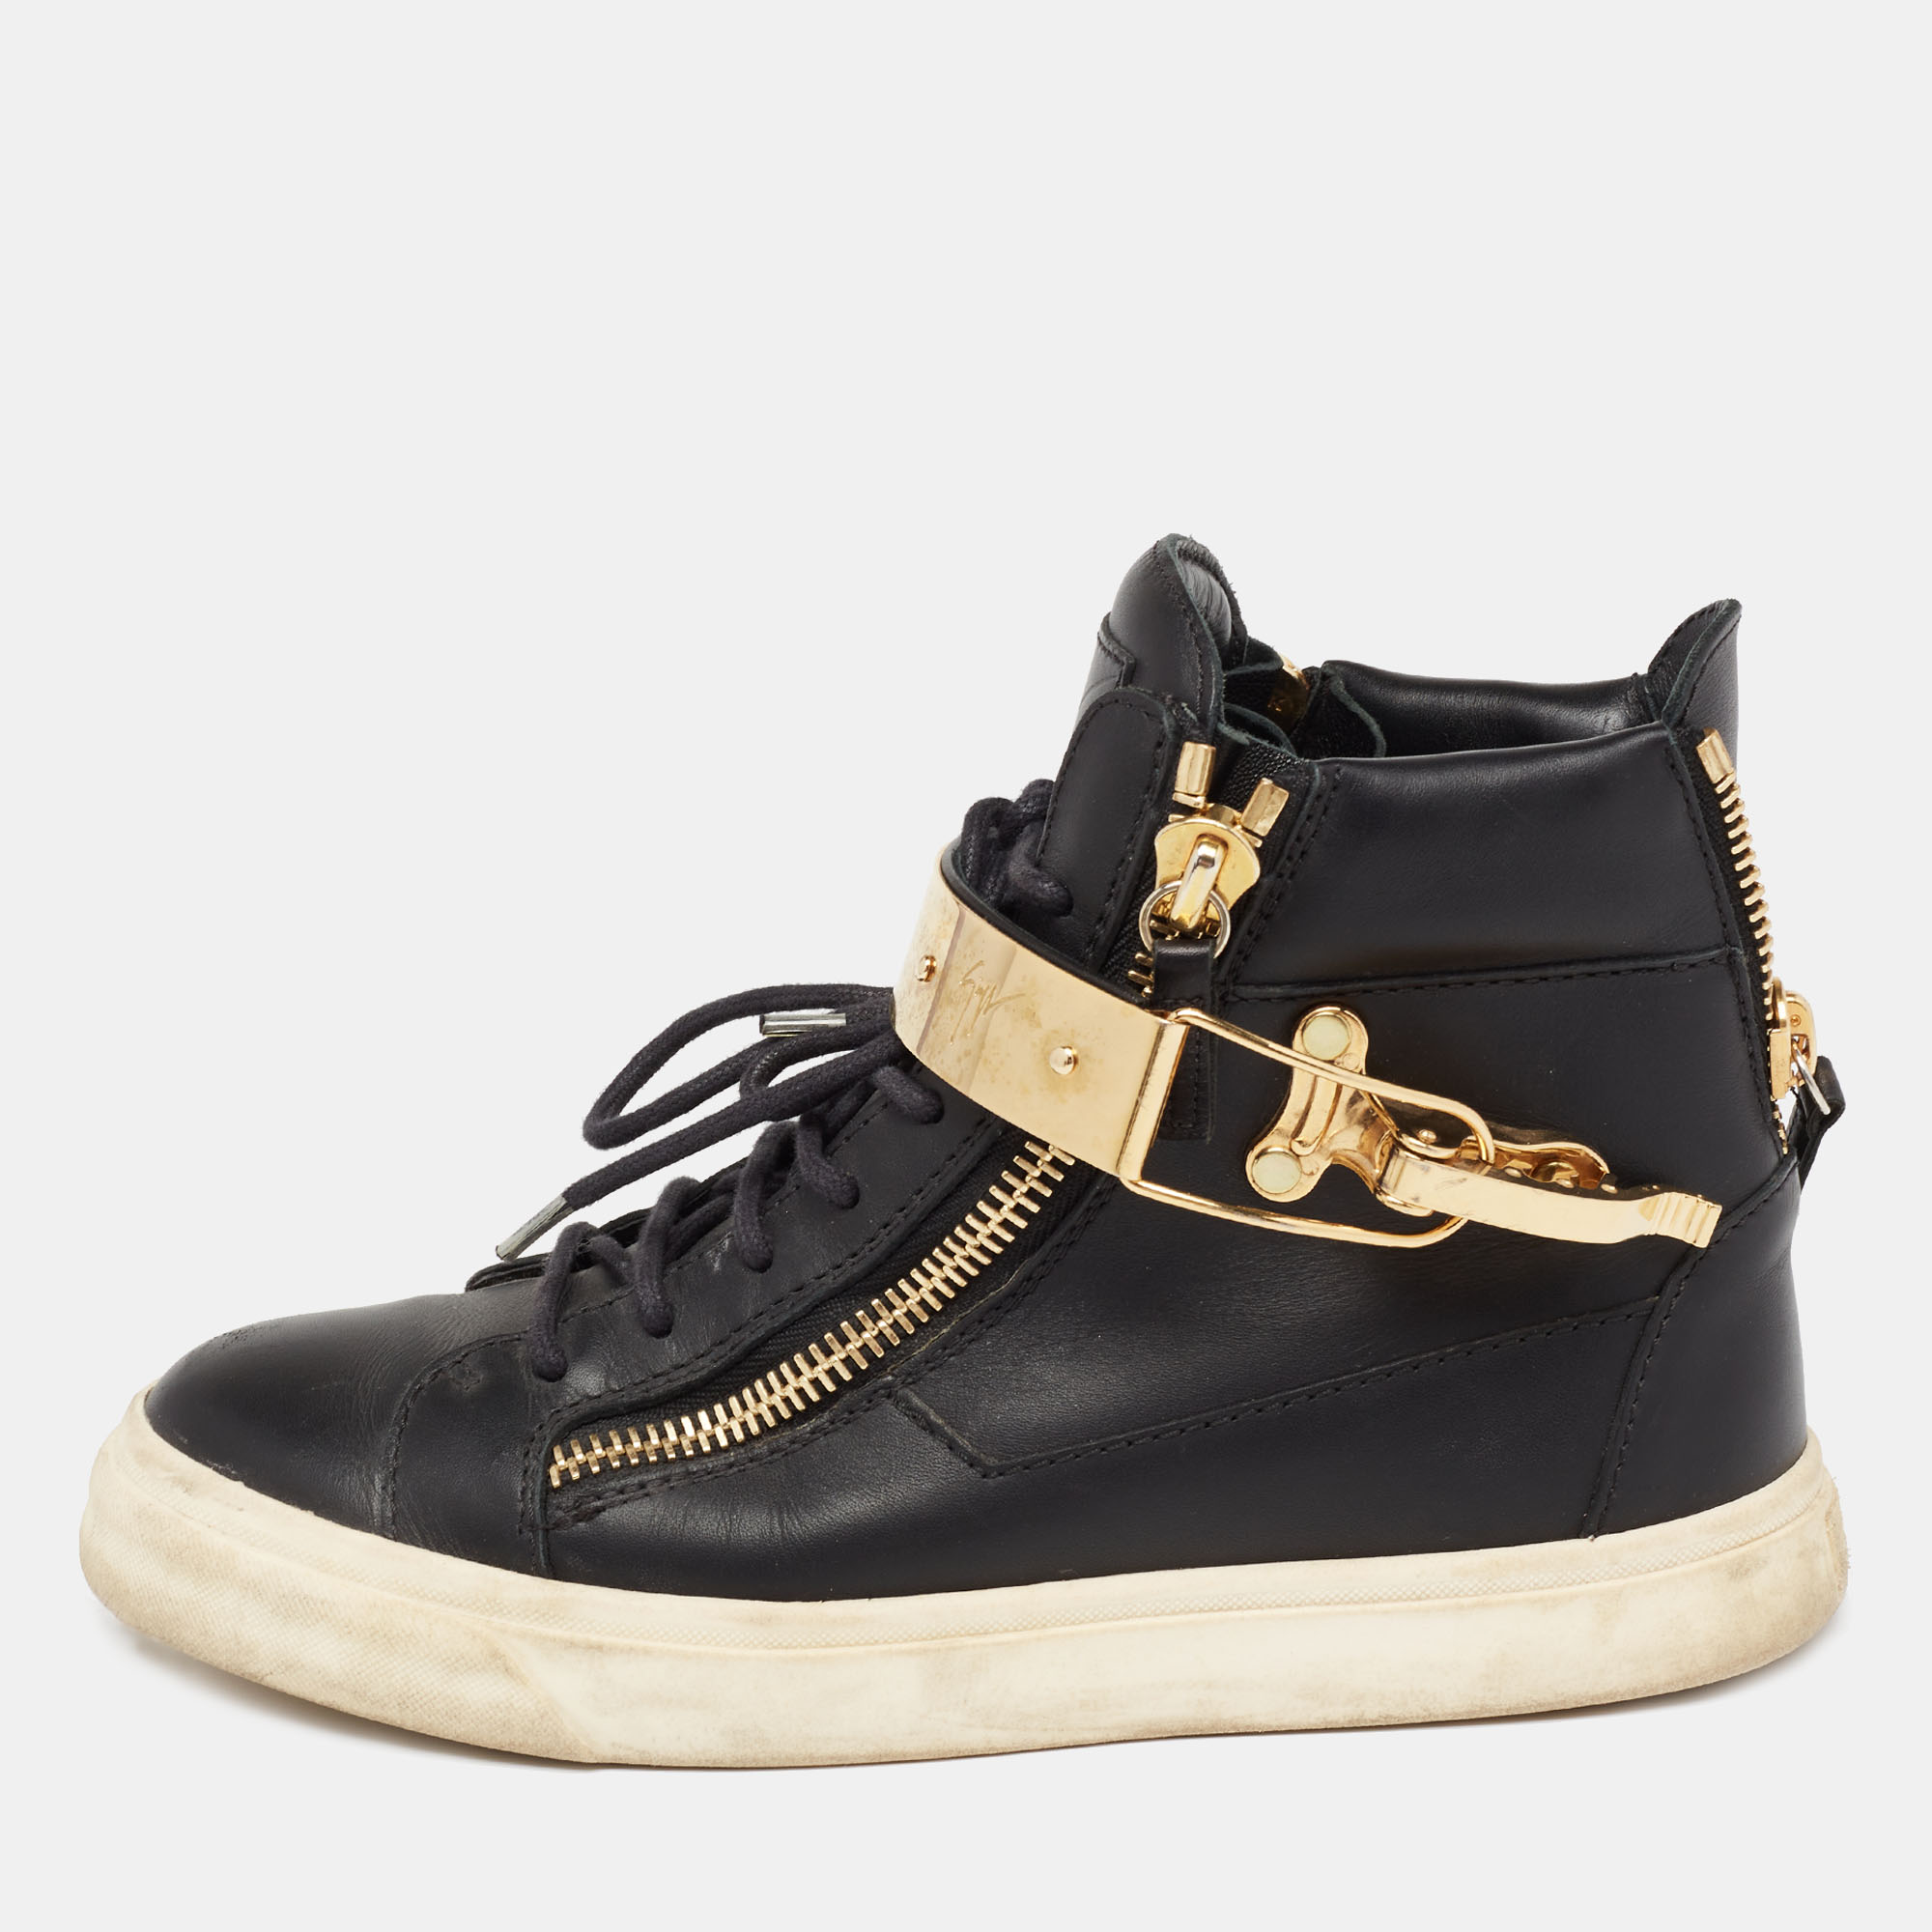 These Coby sneakers from Giuseppe Zanotti will bring you never ending trendiness and contemporary style They are made from black gold leather into a high top silhouette. They are adorned with lace up and zipper fastenings and gold tone hardware. Sport a trendy style with these sneakers